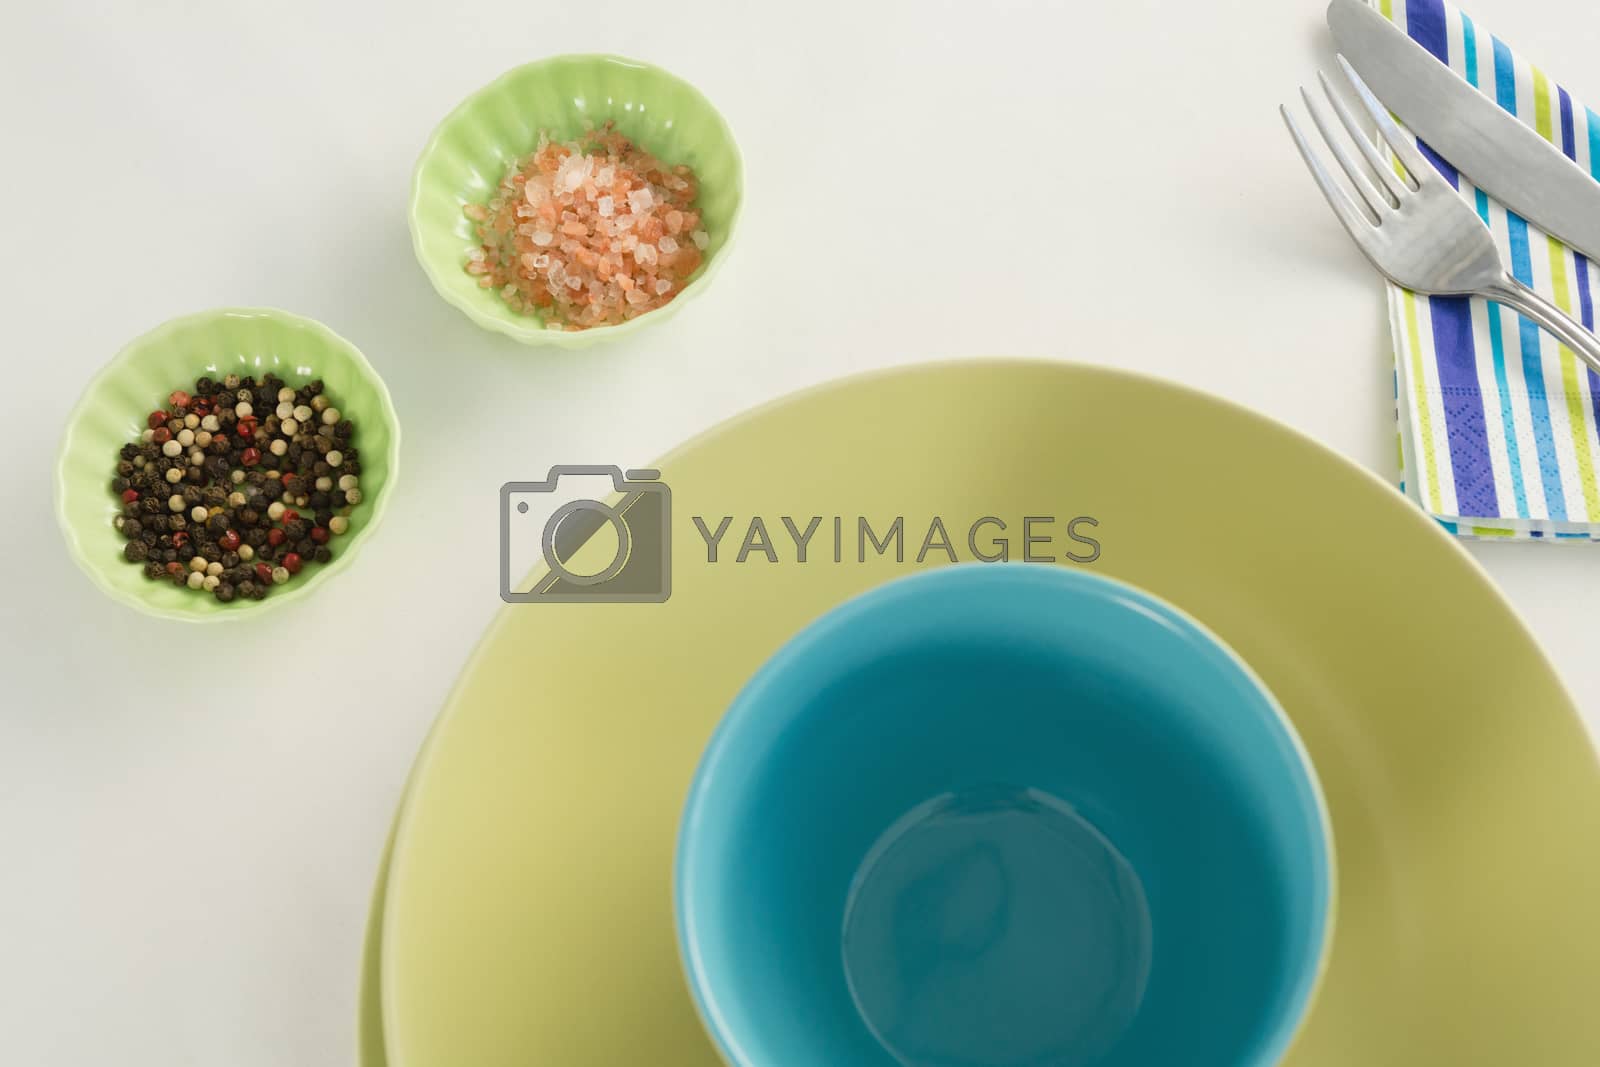 Royalty free image of Cutlery with bowls and ingredients by Wavebreakmedia